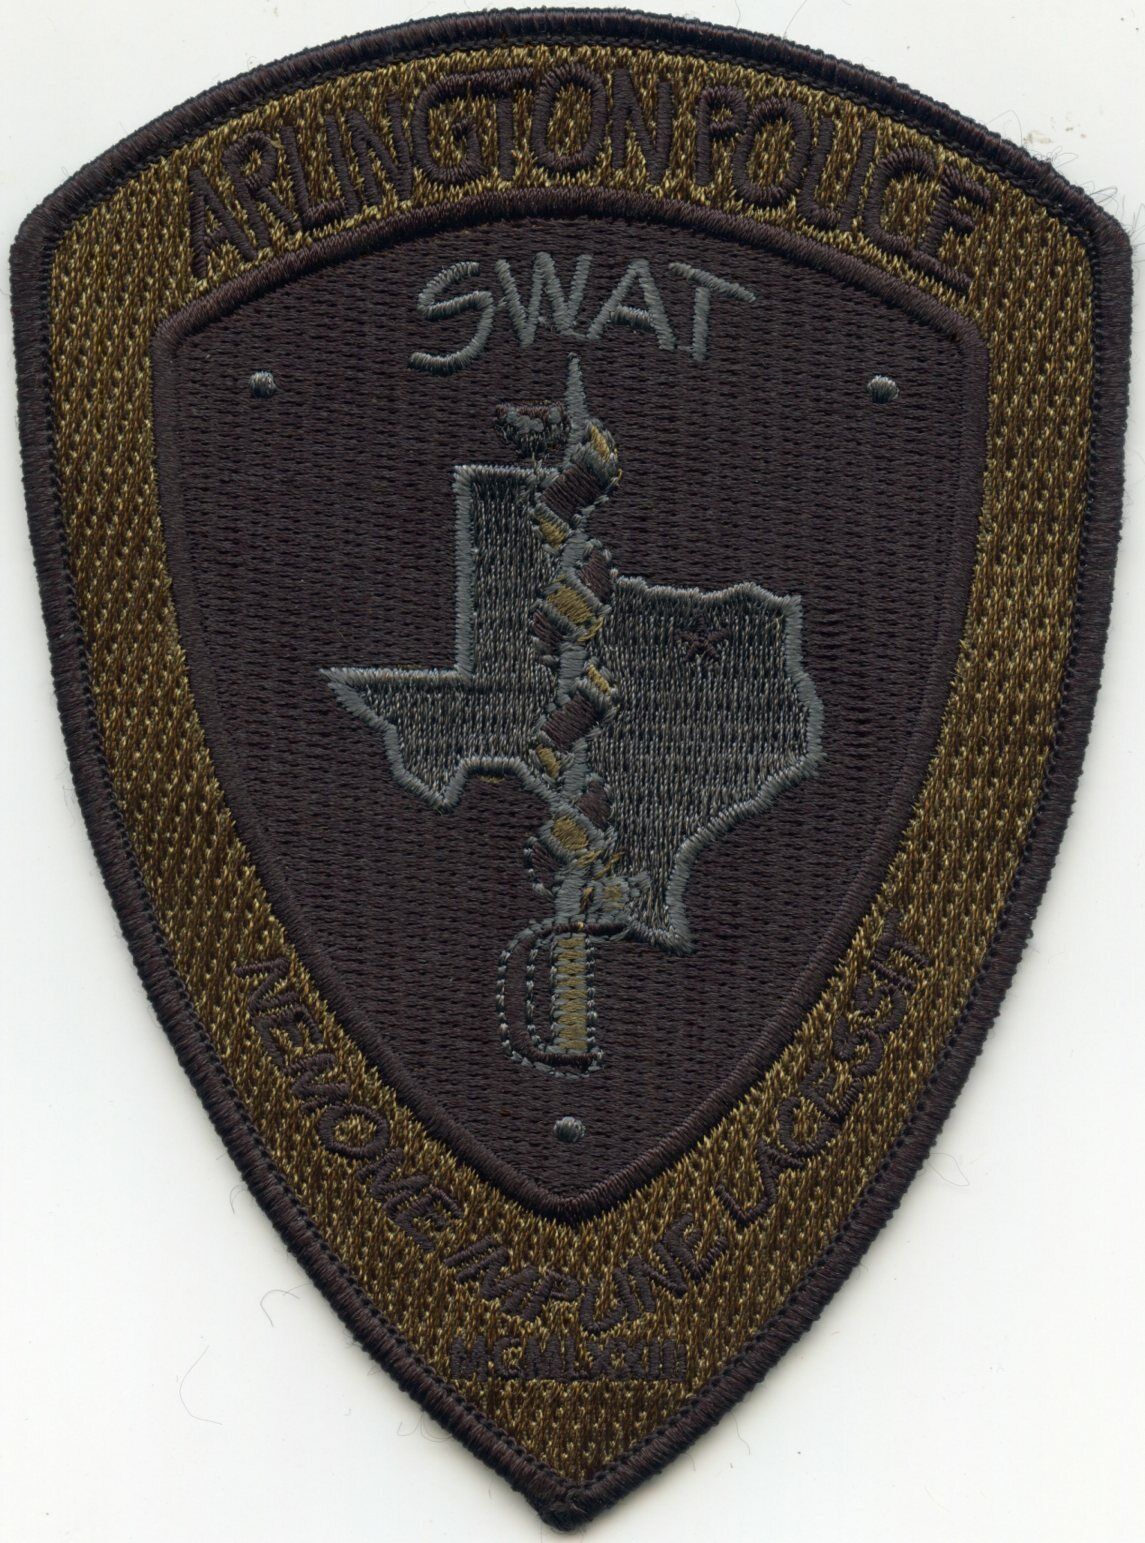 ARLINGTON TEXAS TX subdued green SWAT POLICE PATCH